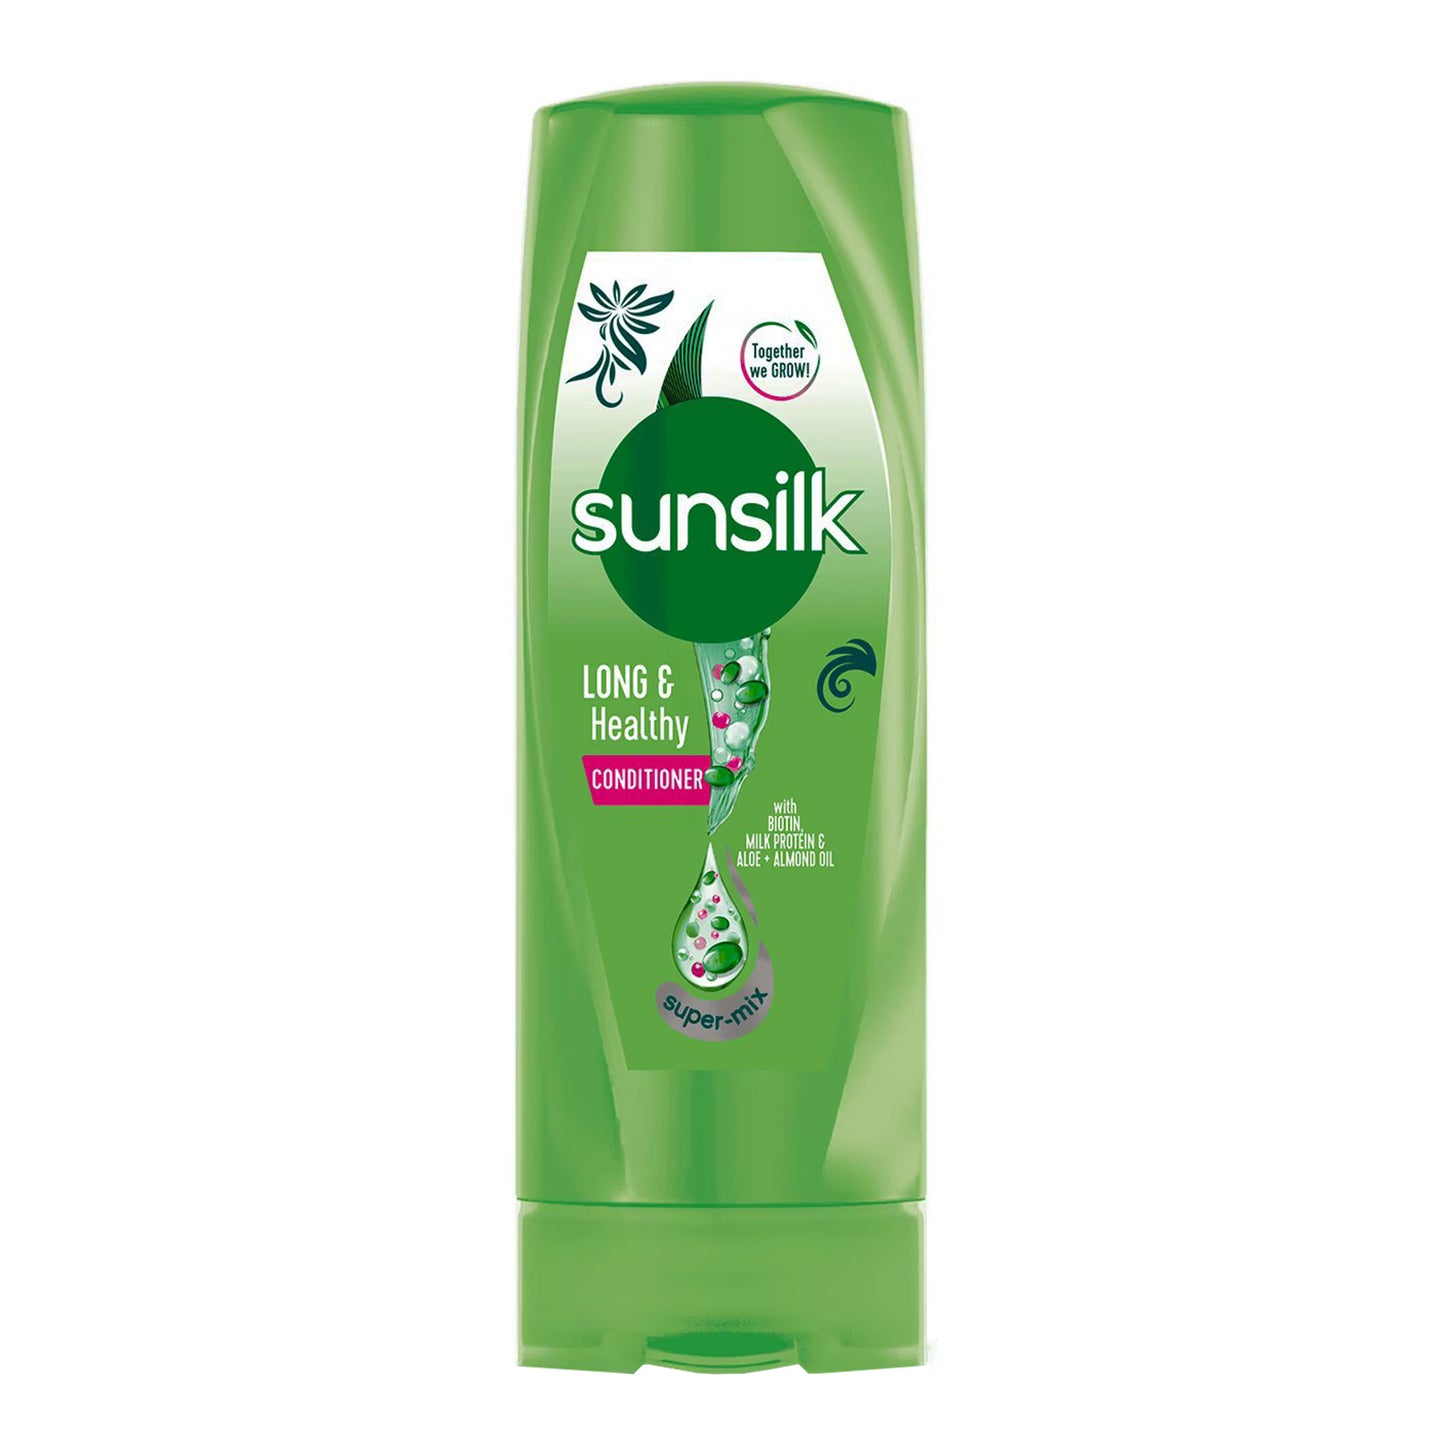 Sunsilk Long and Healthy Growth Conditioner (180ml)